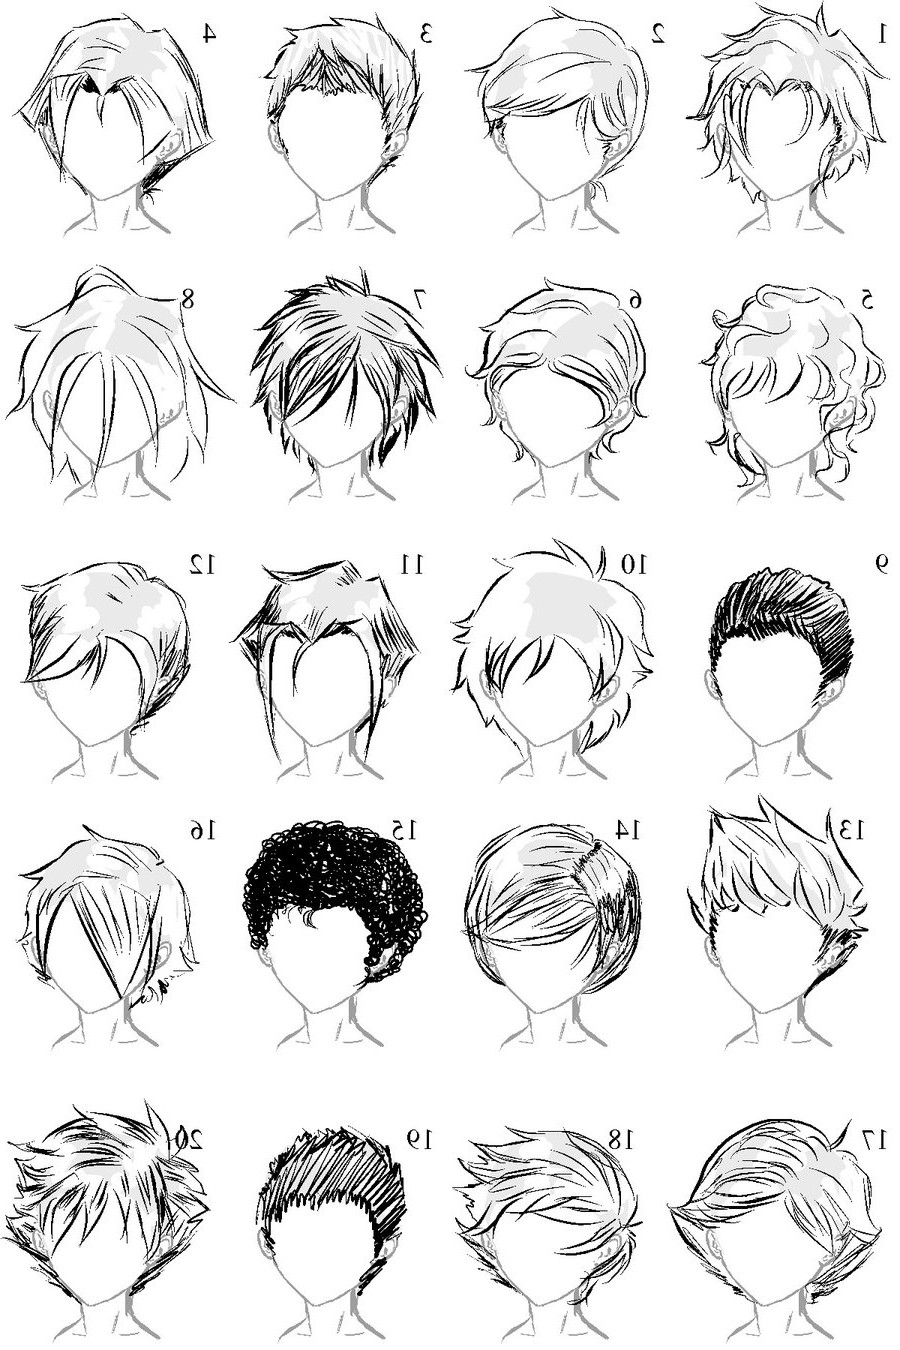 Anime Hairstyles Boy
 Male Anime Hairstyles Drawing at PaintingValley